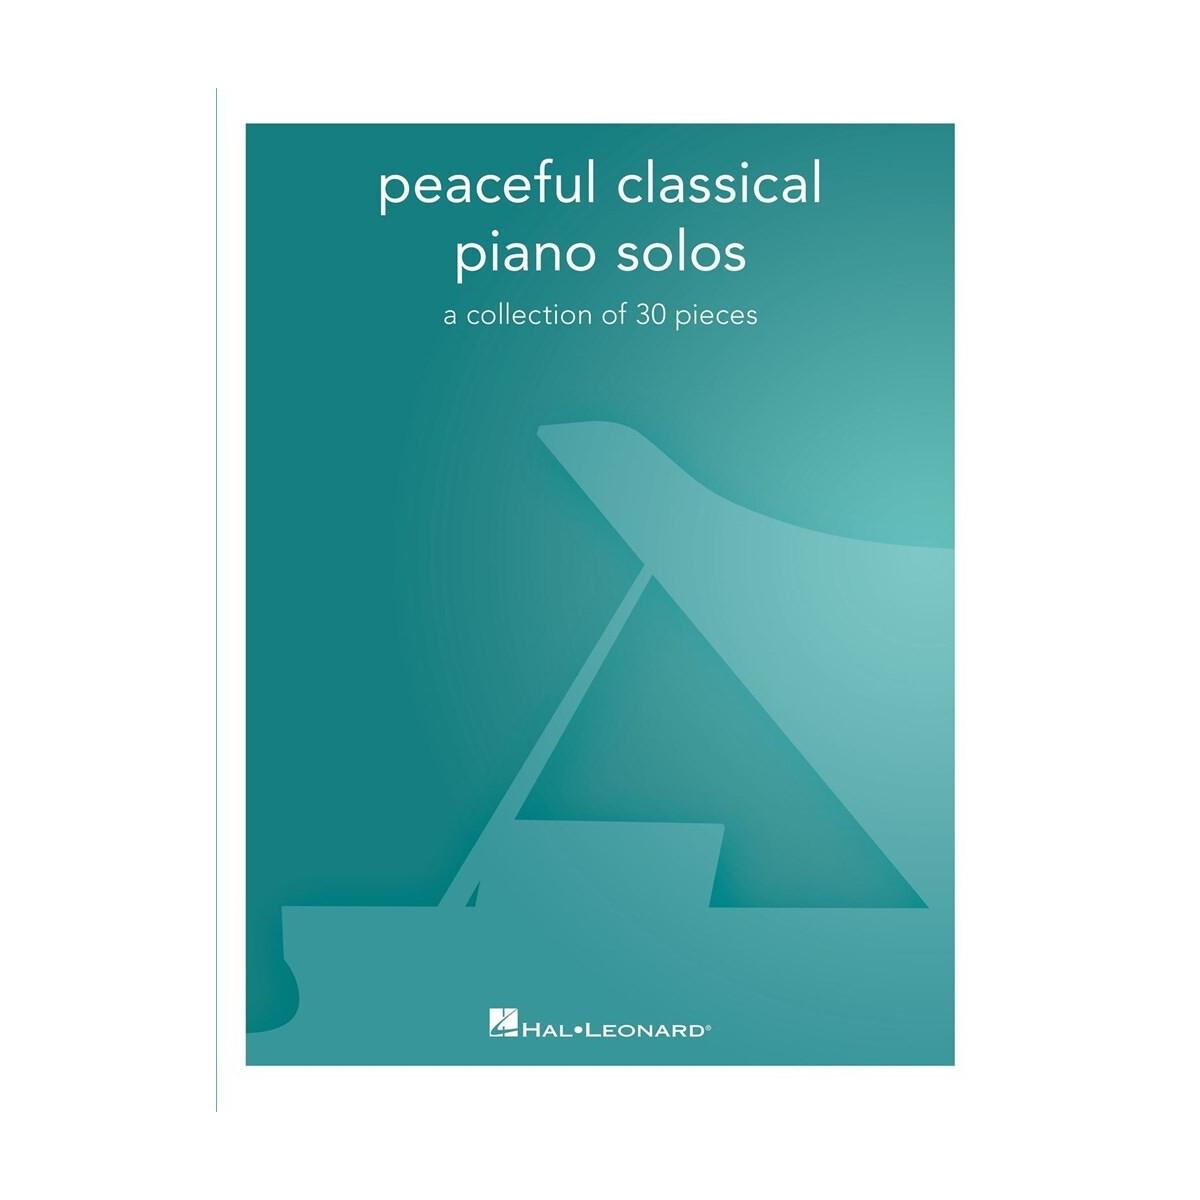 Peaceful classical piano solos